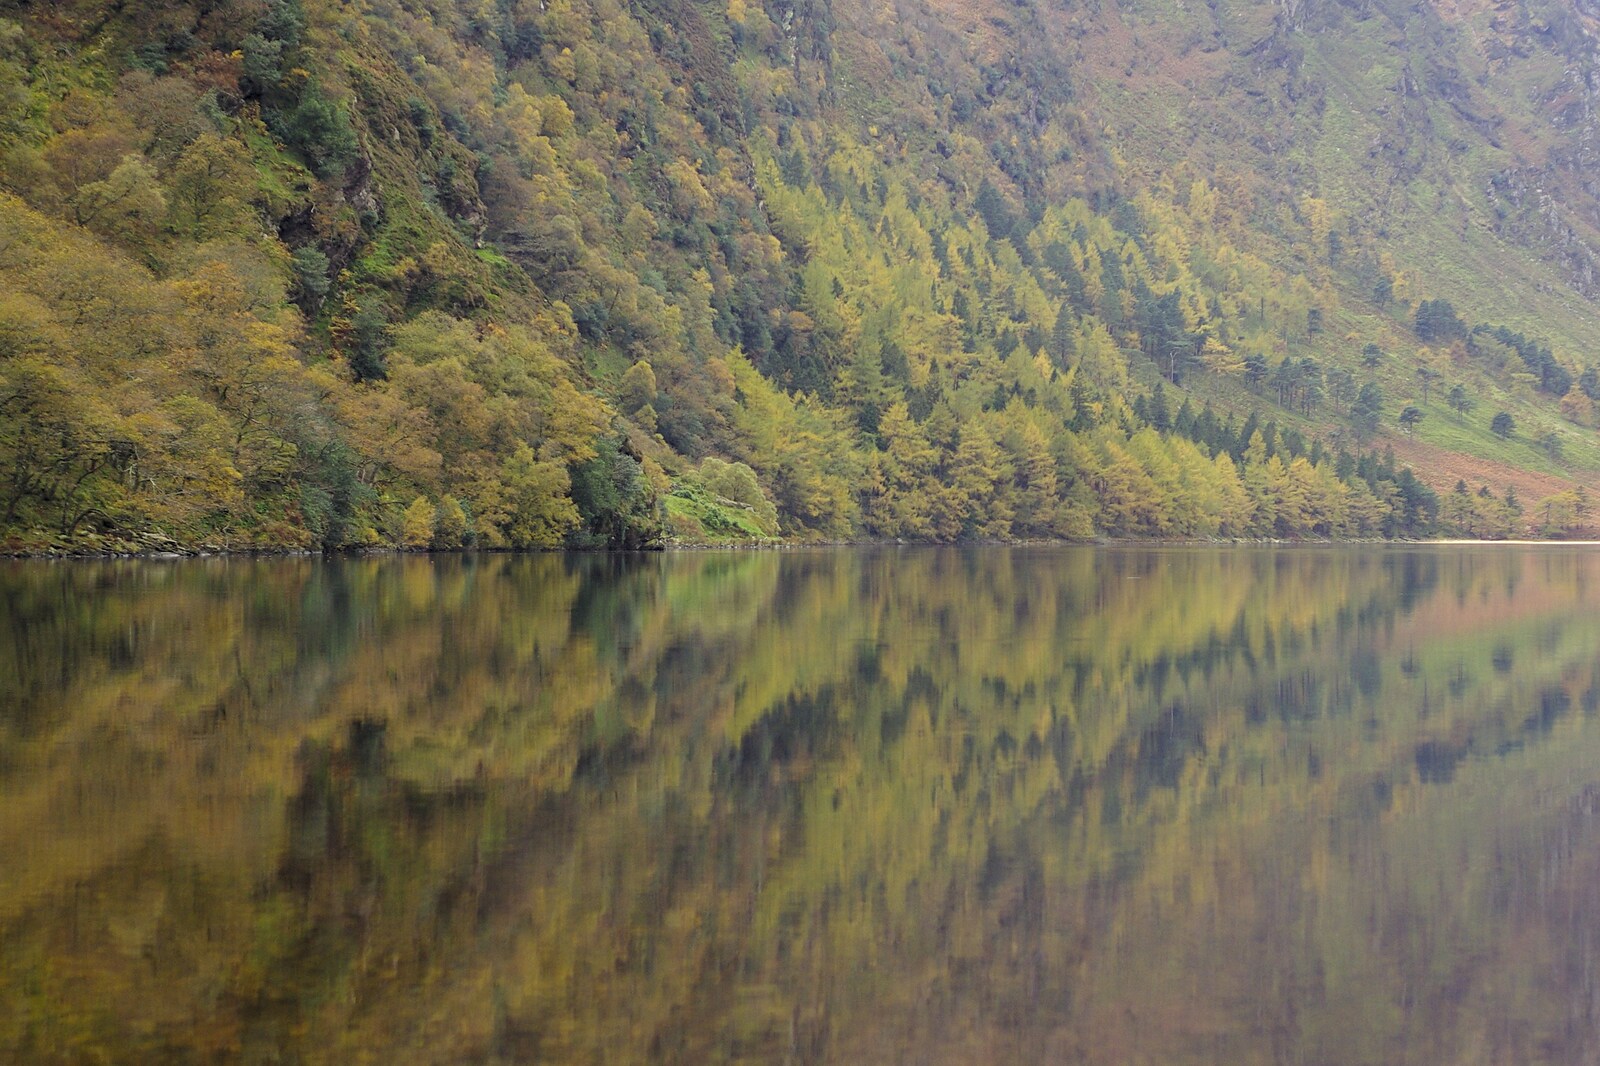 Reflections: A Day at Glendalough, County Wicklow, Ireland - 3rd November 2007: Autumn reflections in the water of Glendalough